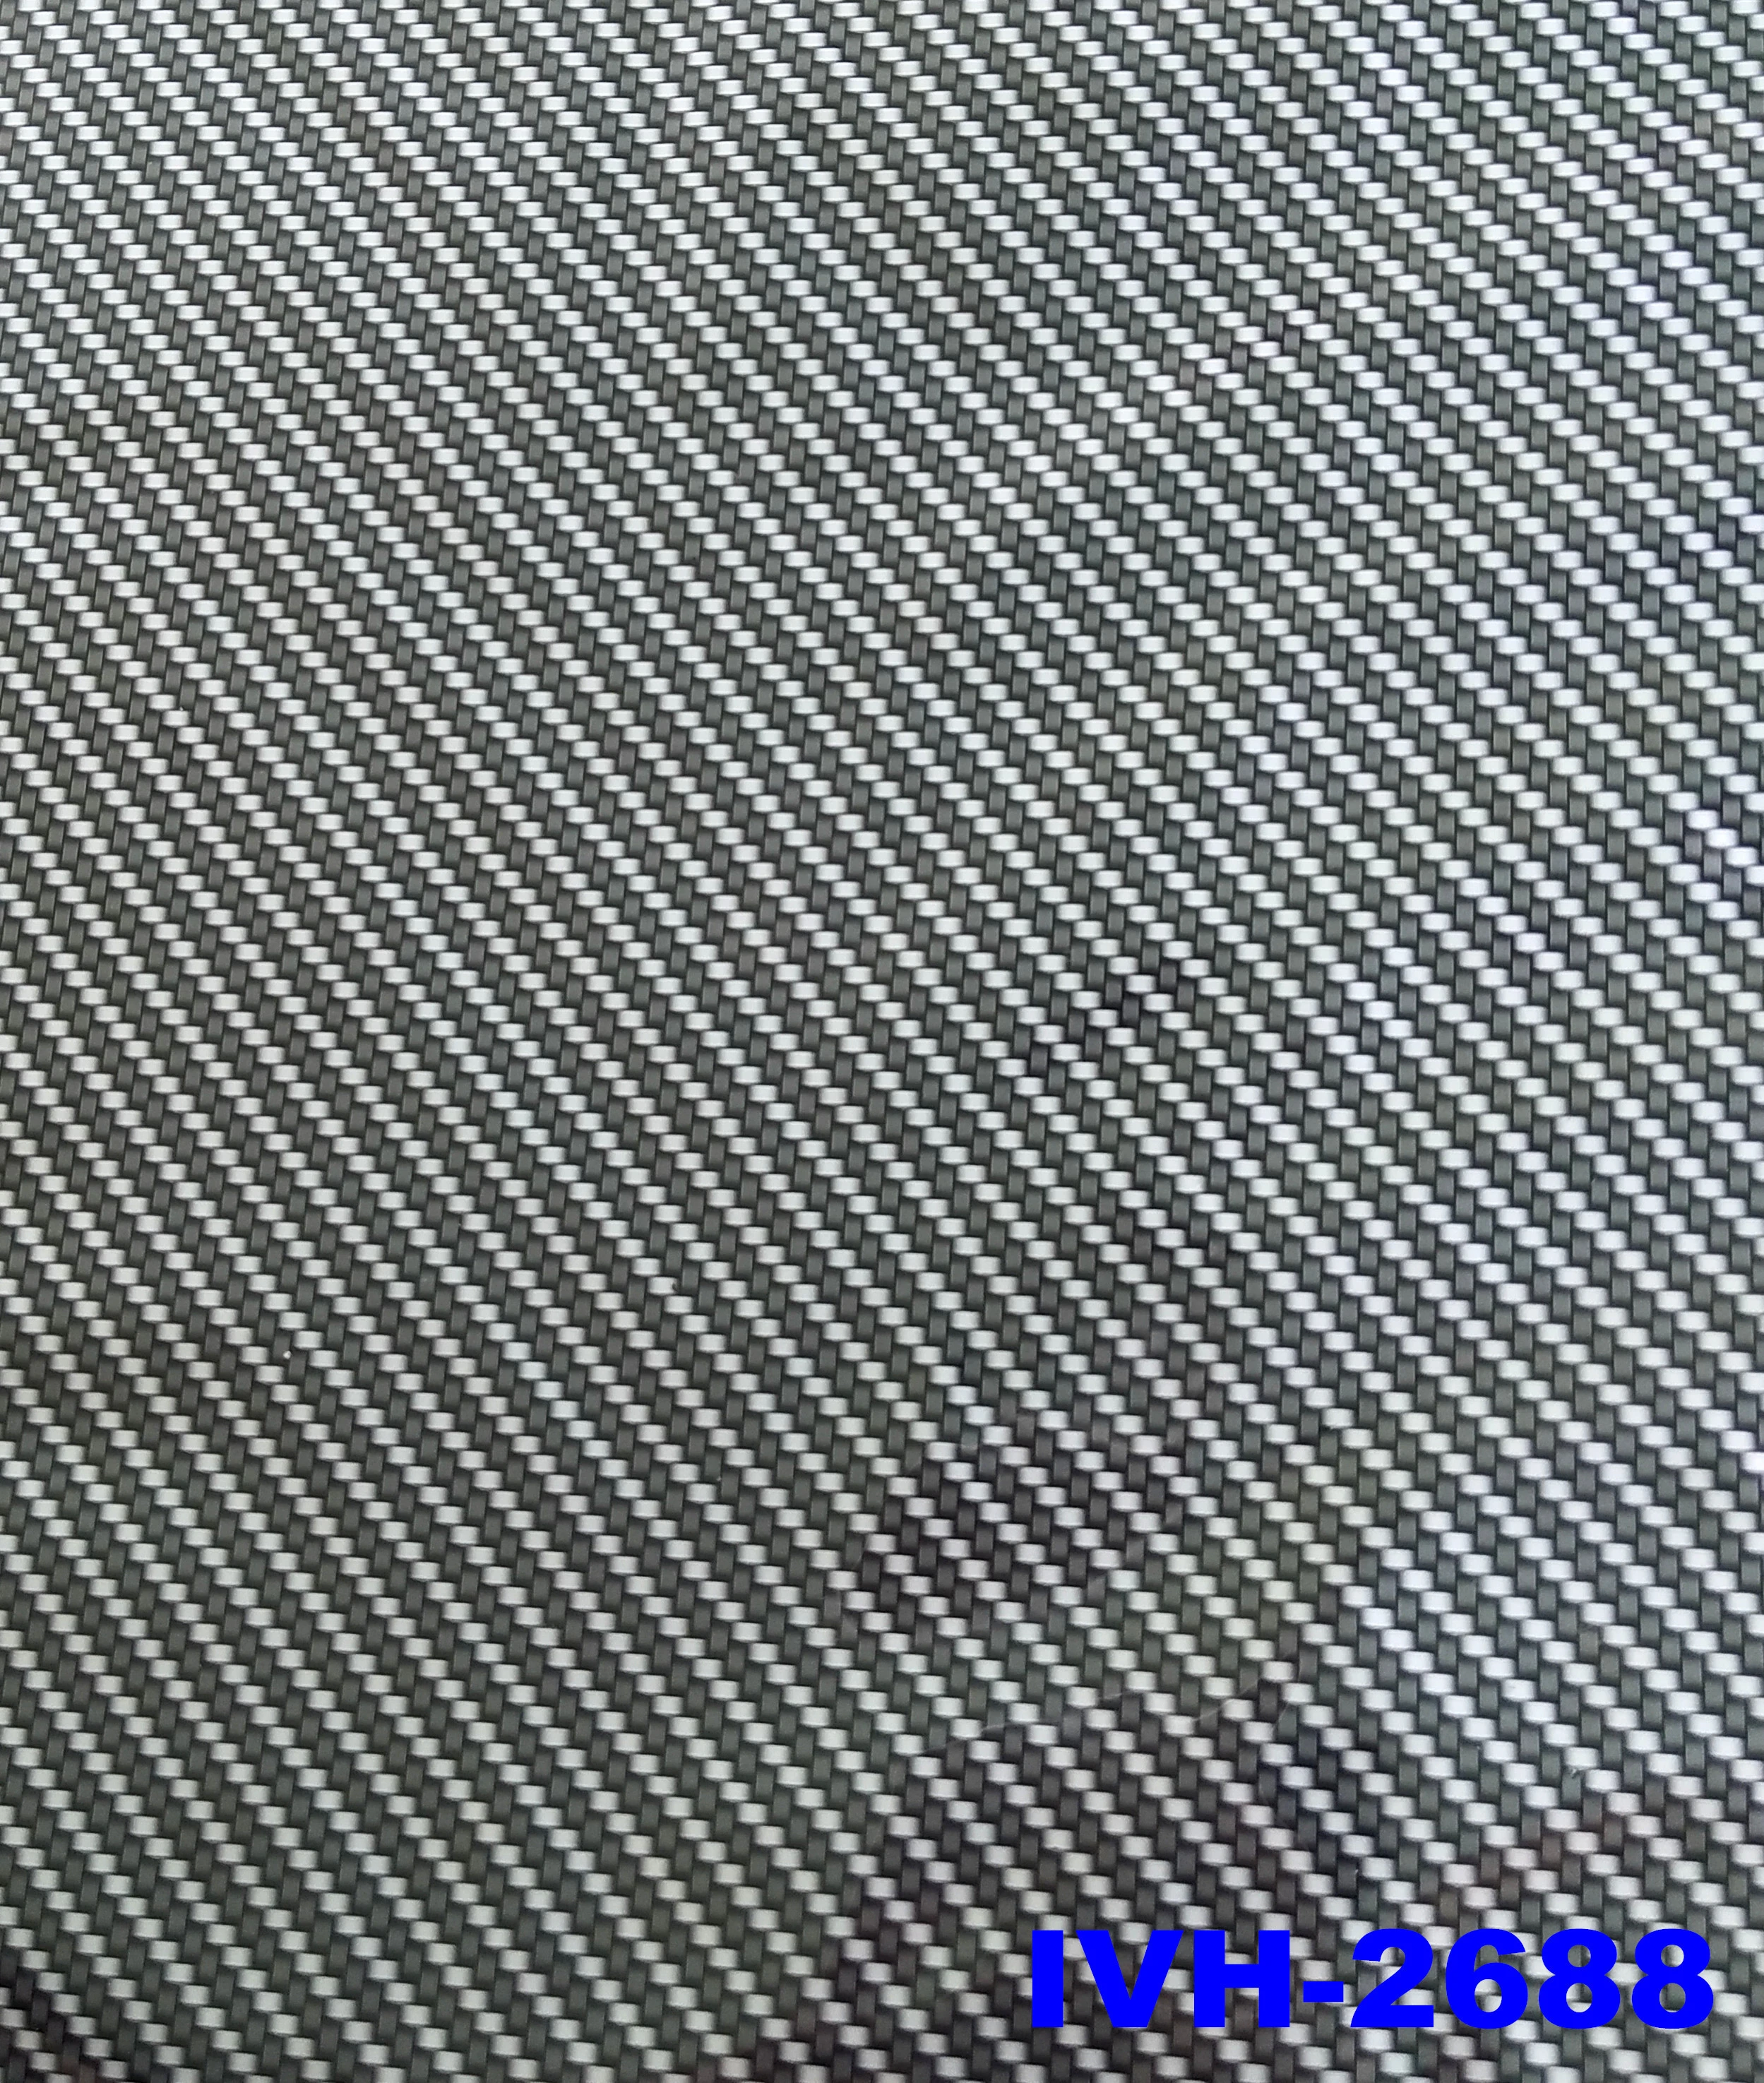 50/100/120CM Black Carbon fiber Hydrographic Water Transfer Printing Film IVQ-6007 Hydro Dipping Paper